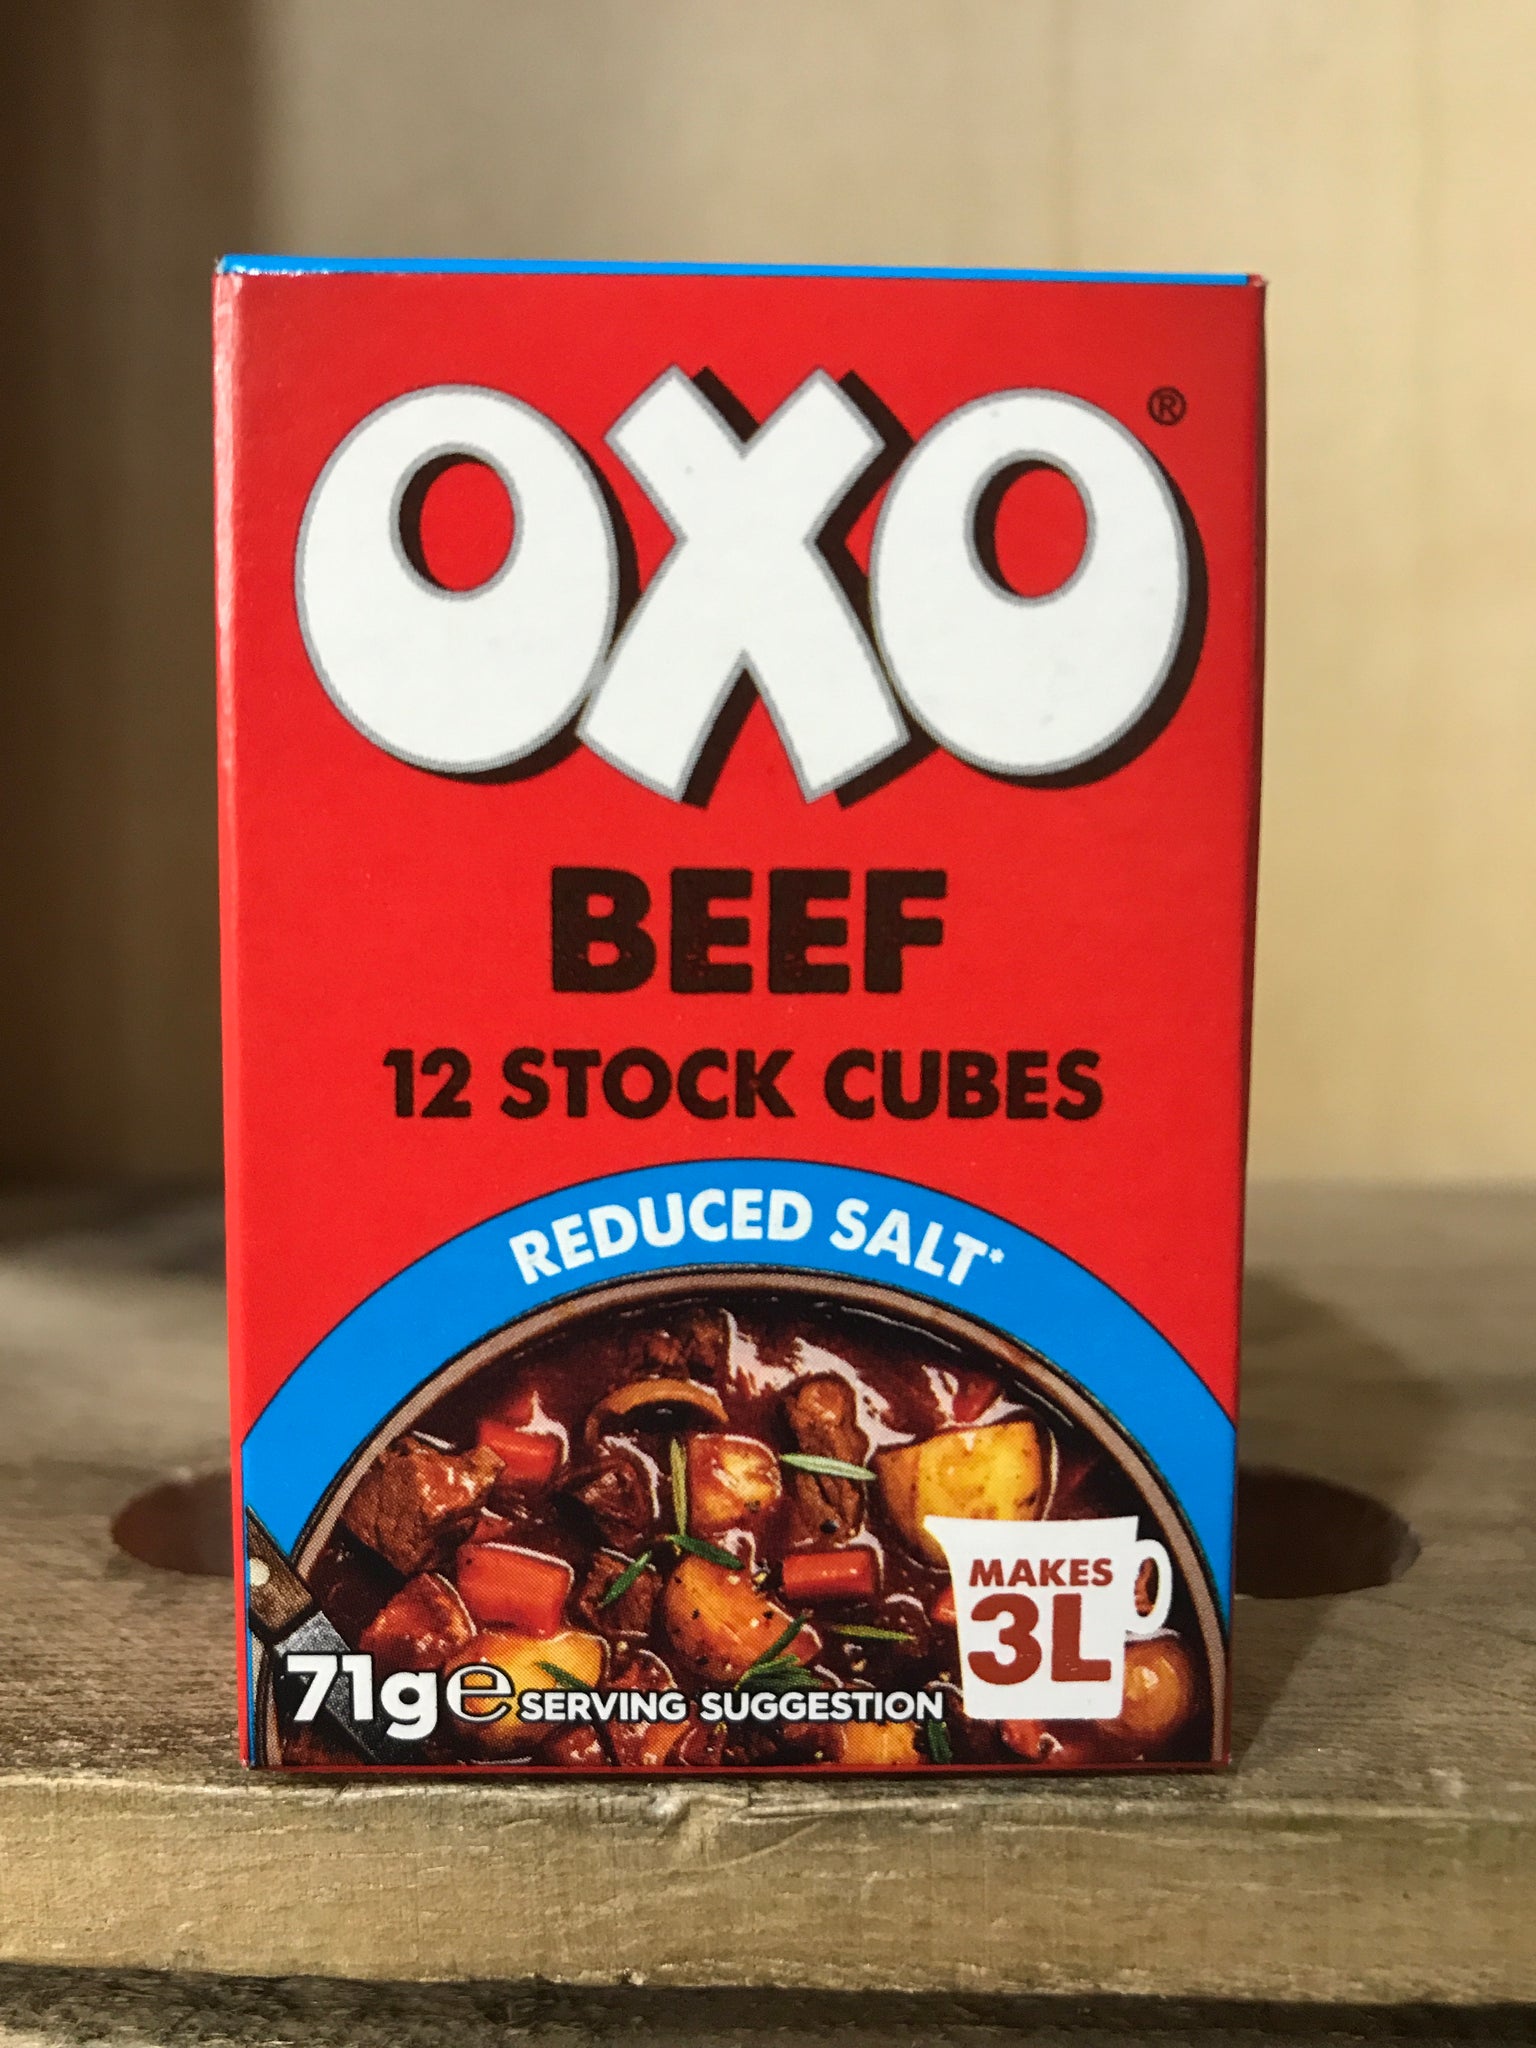 OXO 'BEEF' STOCK CUBES (Genuine) 10 x 12 Cube Packs. Made in the UK.